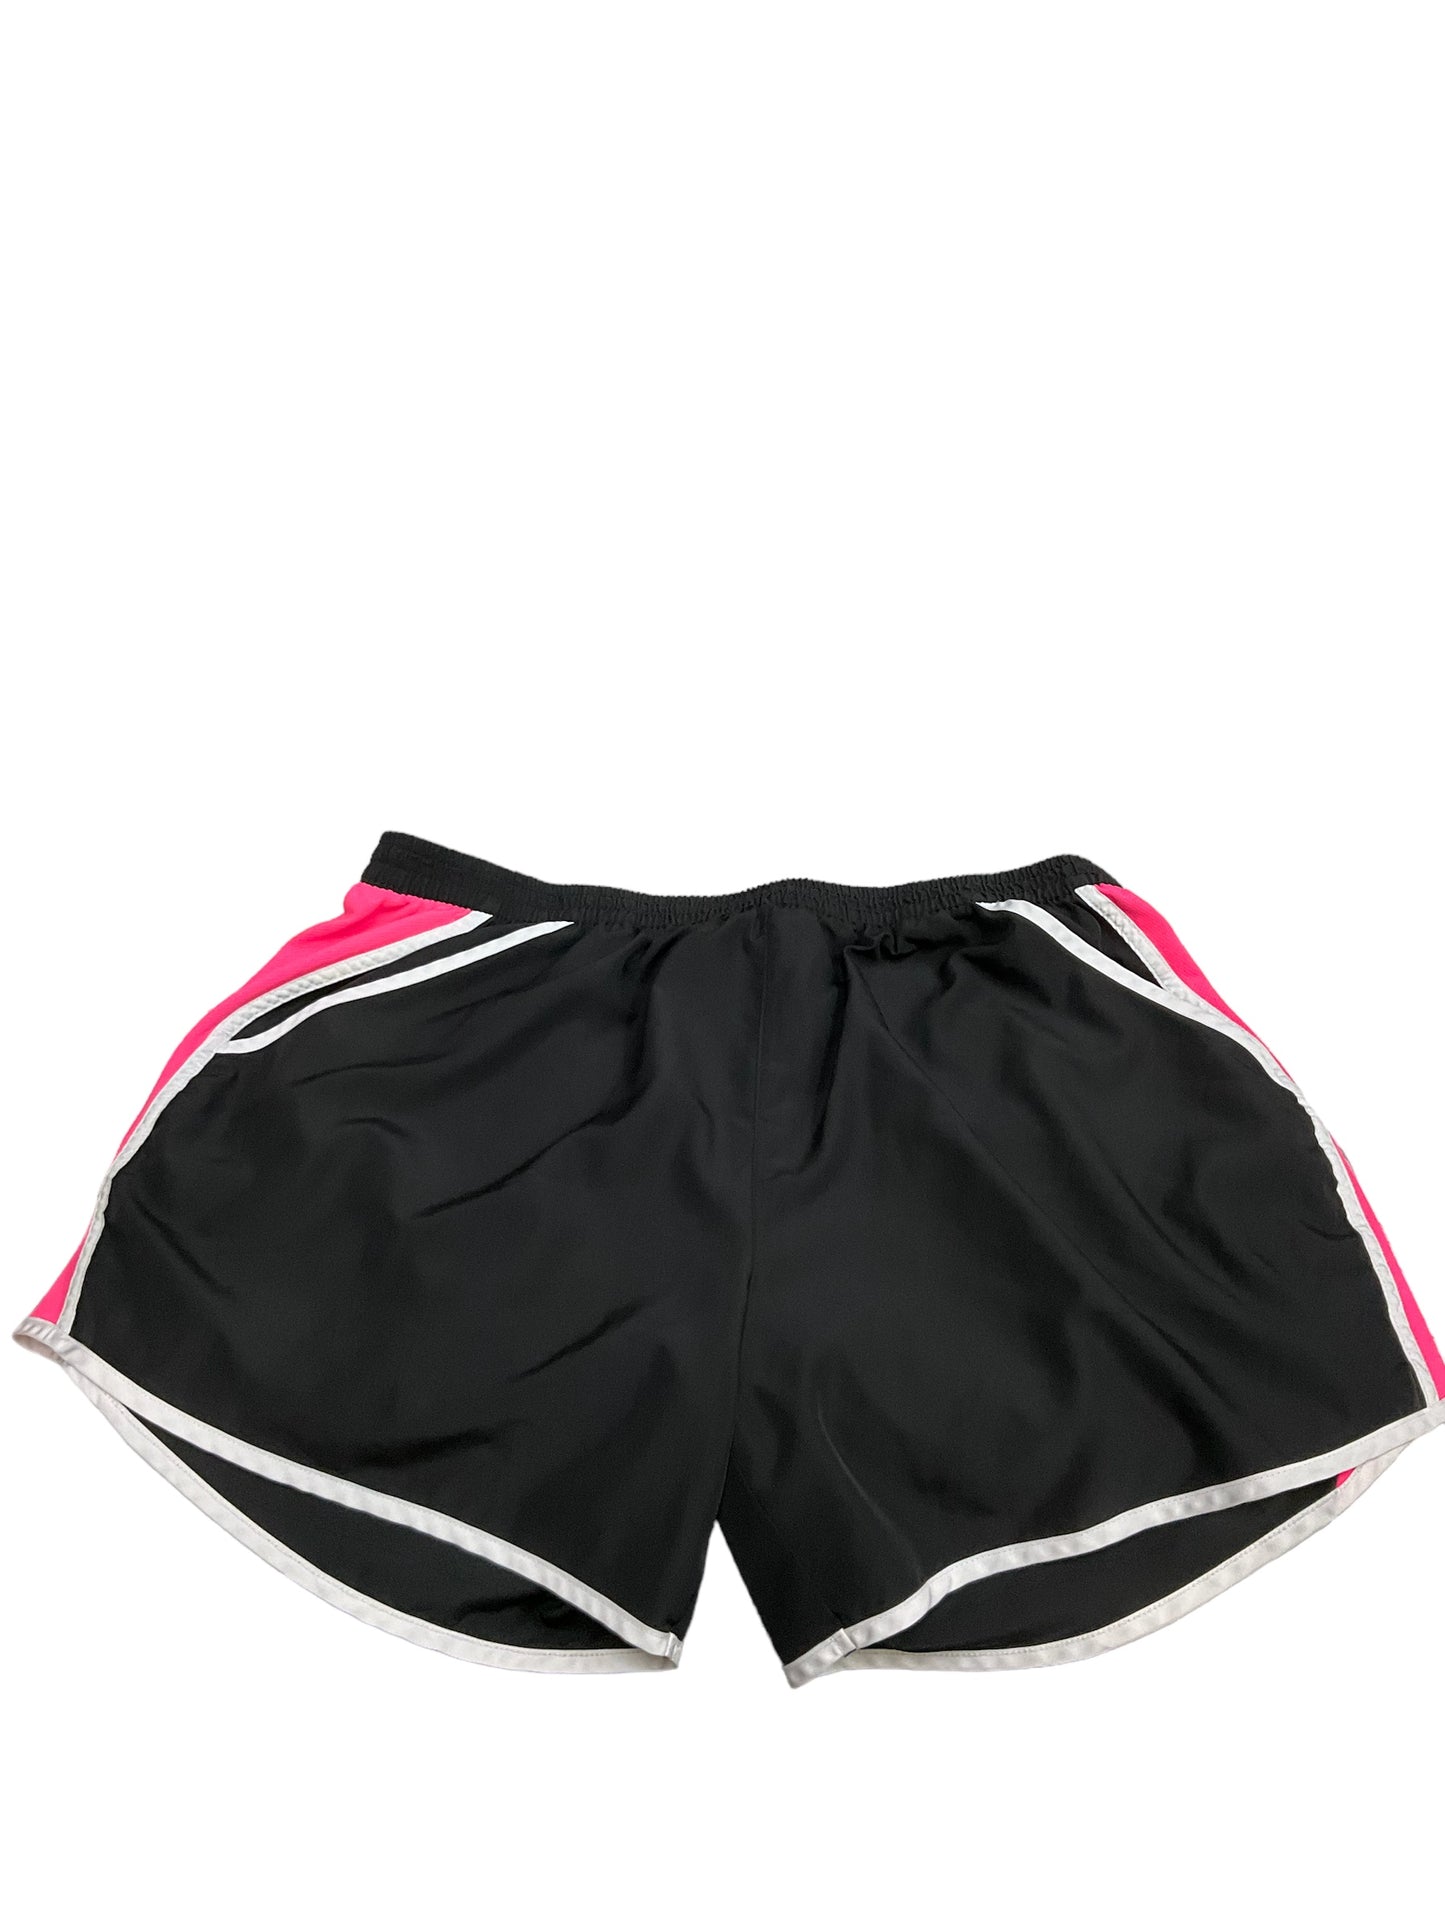 Athletic Shorts By Zone Pro  Size: 3x